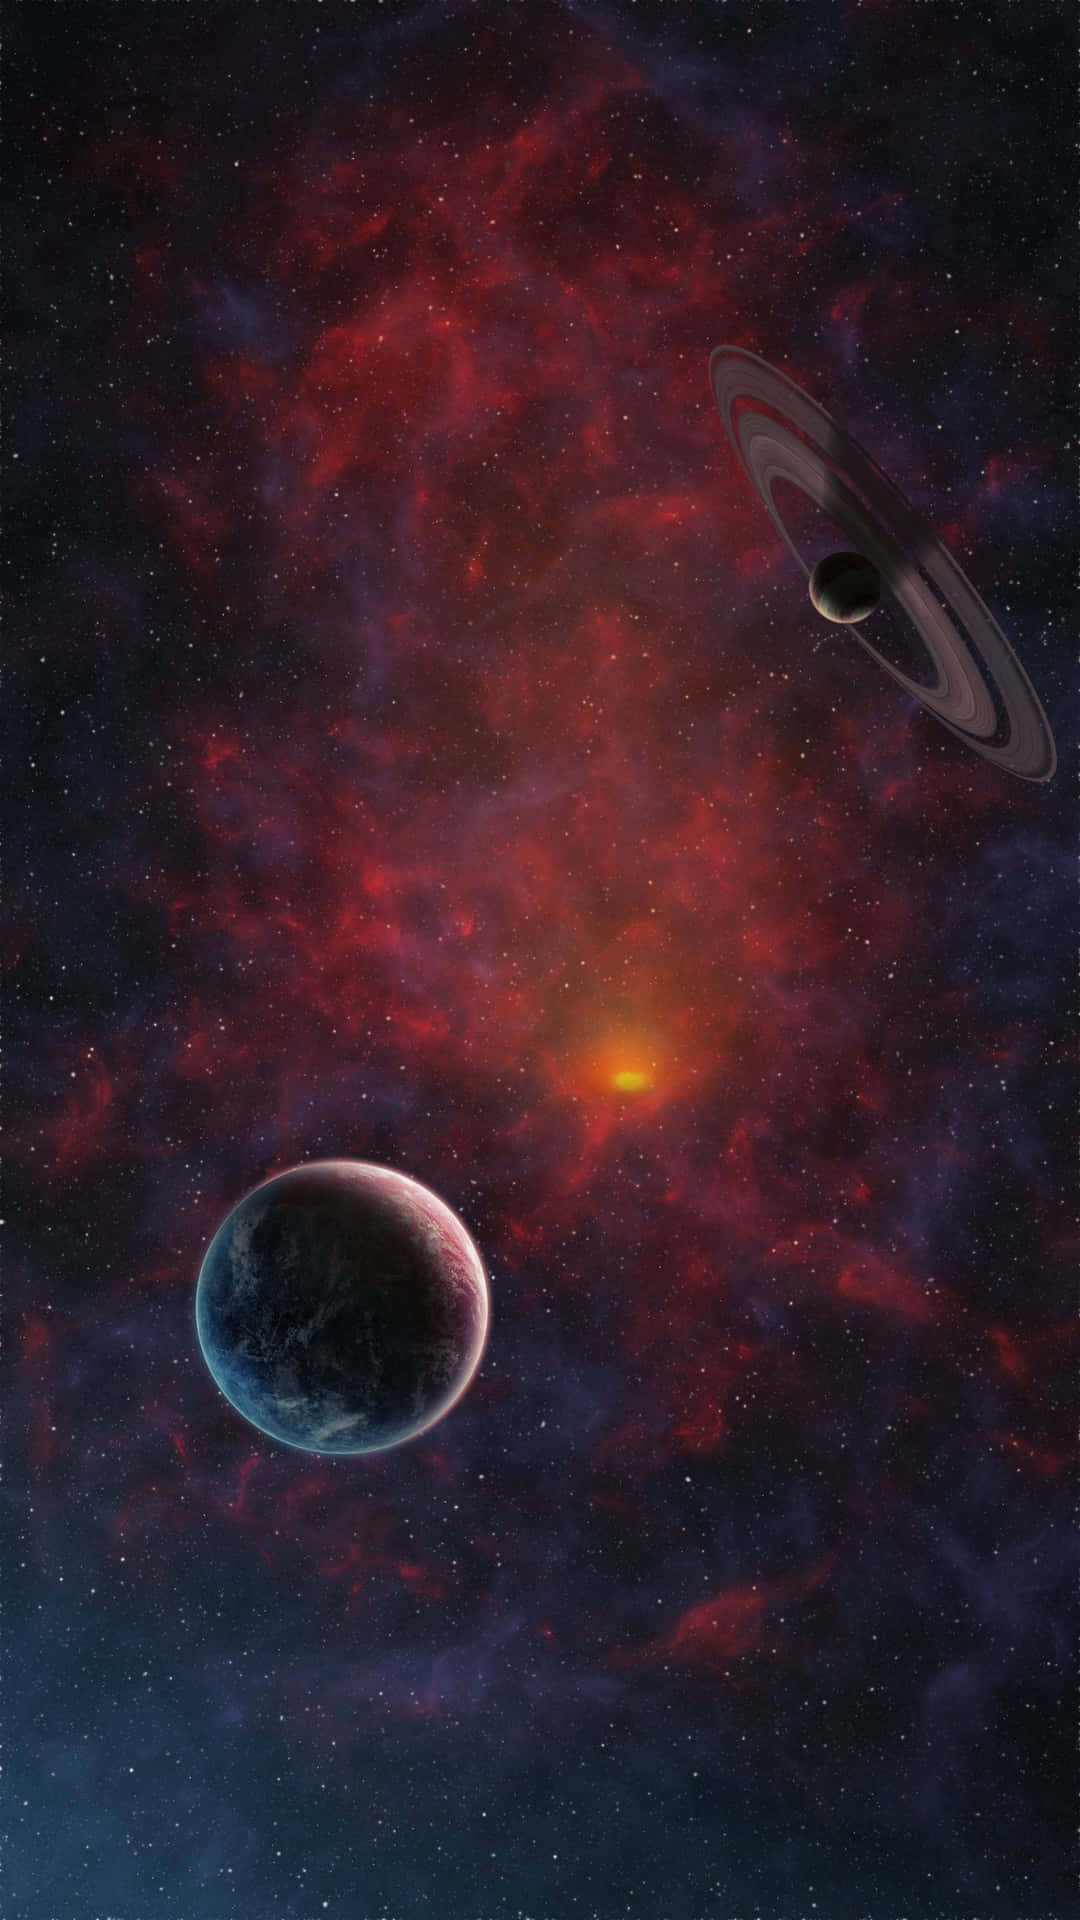 a planet and a star in space Wallpaper